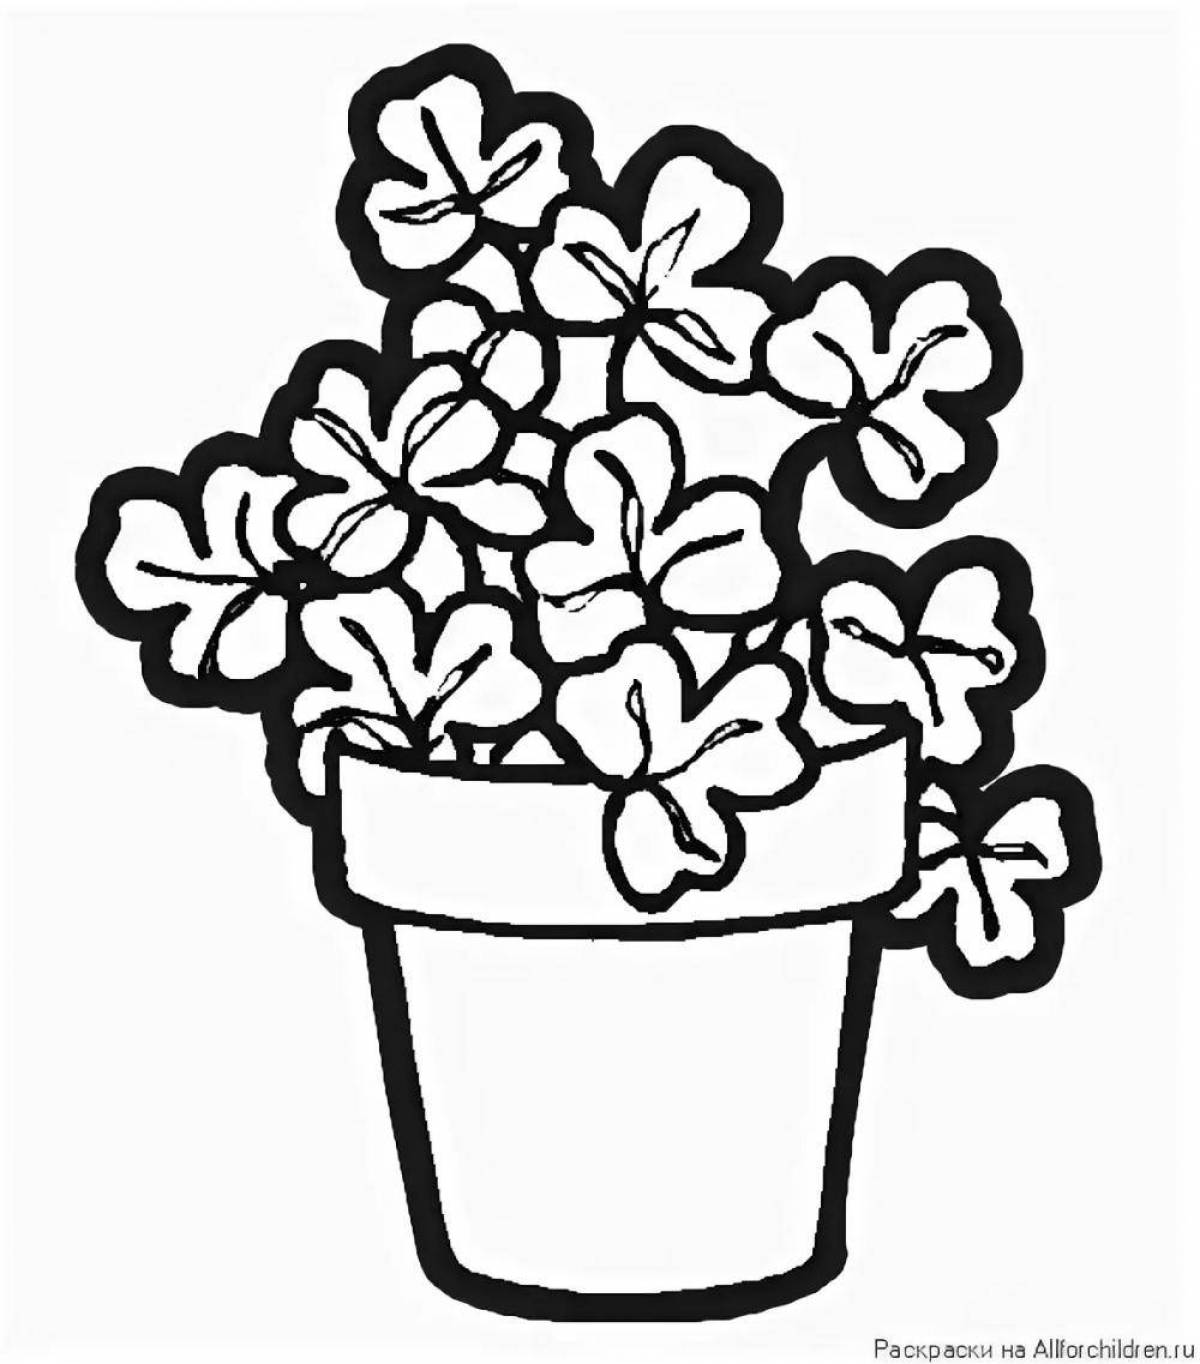 Adorable flower pot coloring page for kids